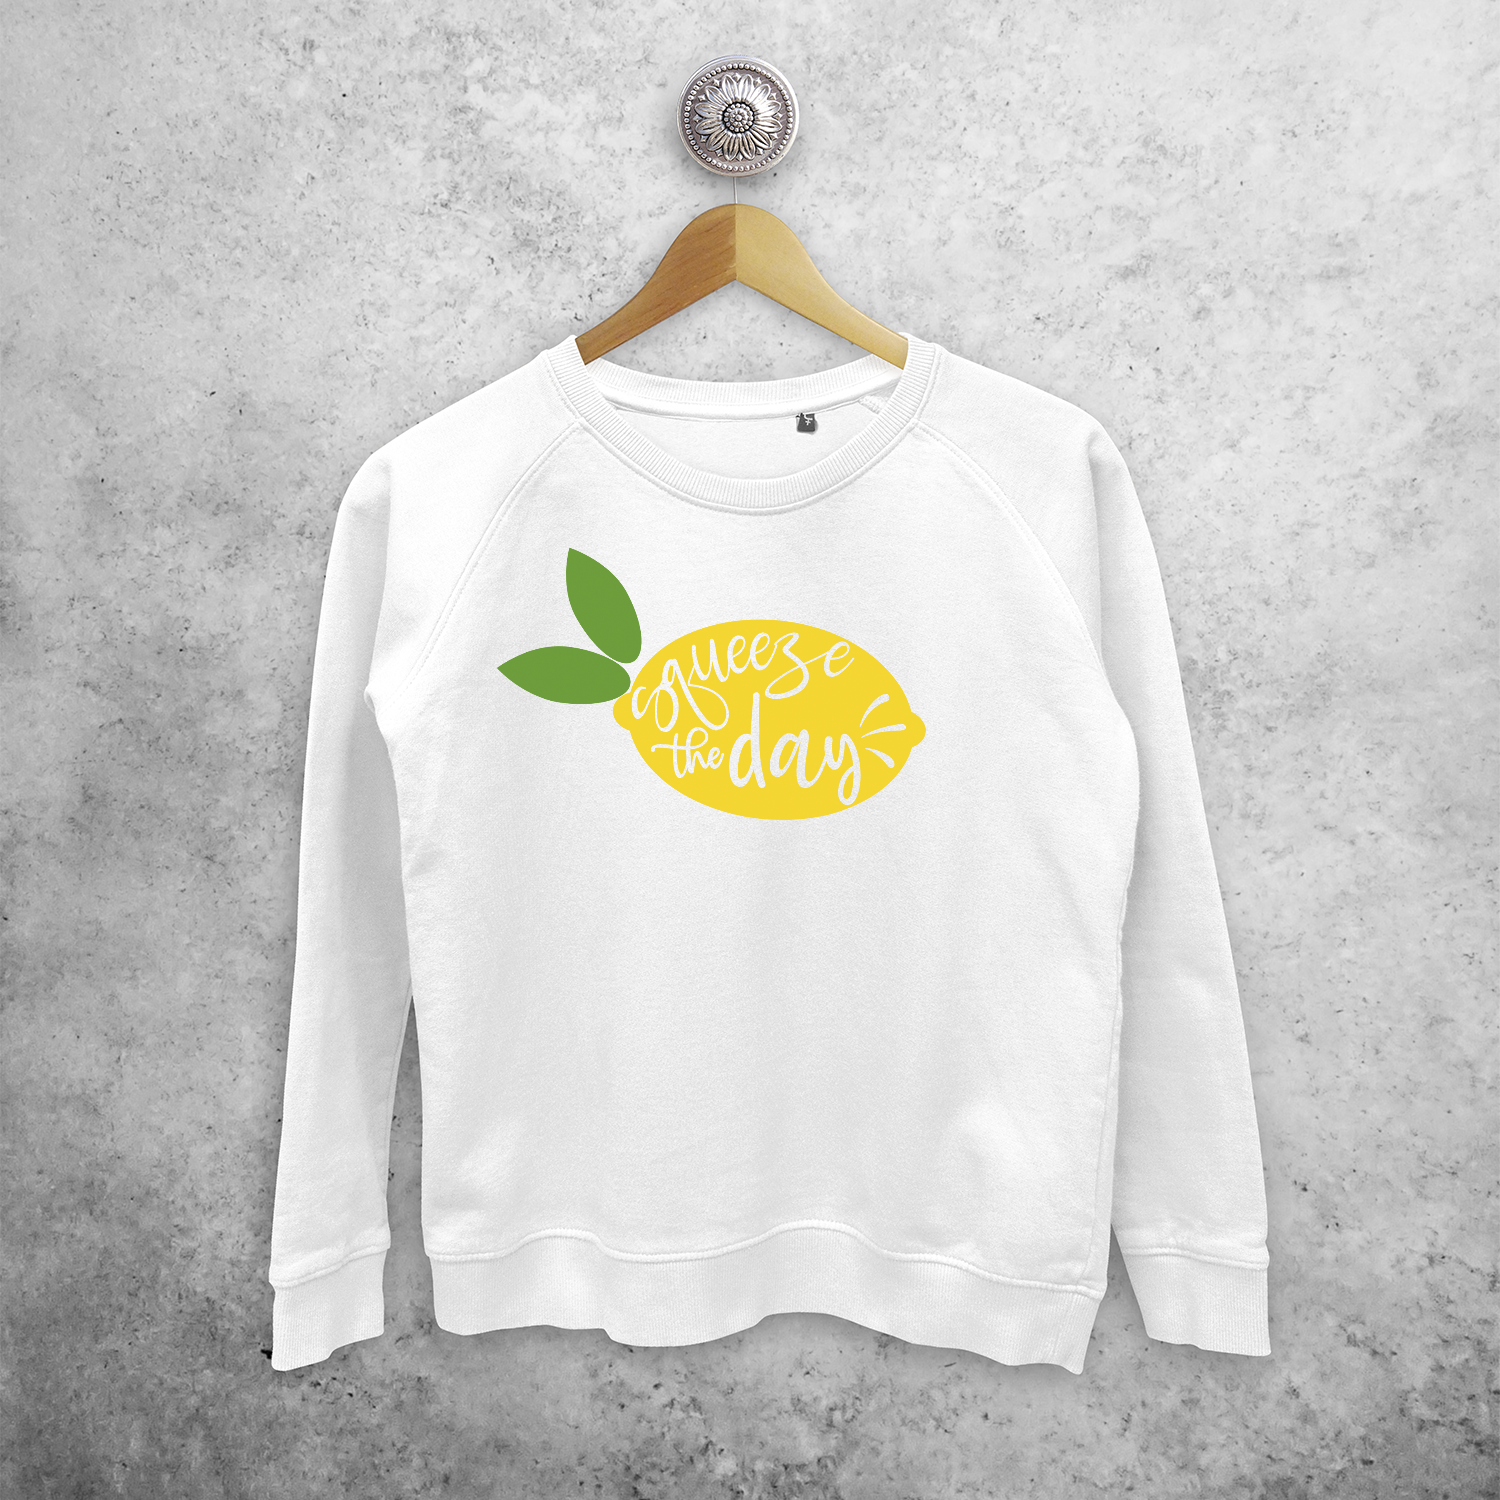 'Squeeze the day' sweater